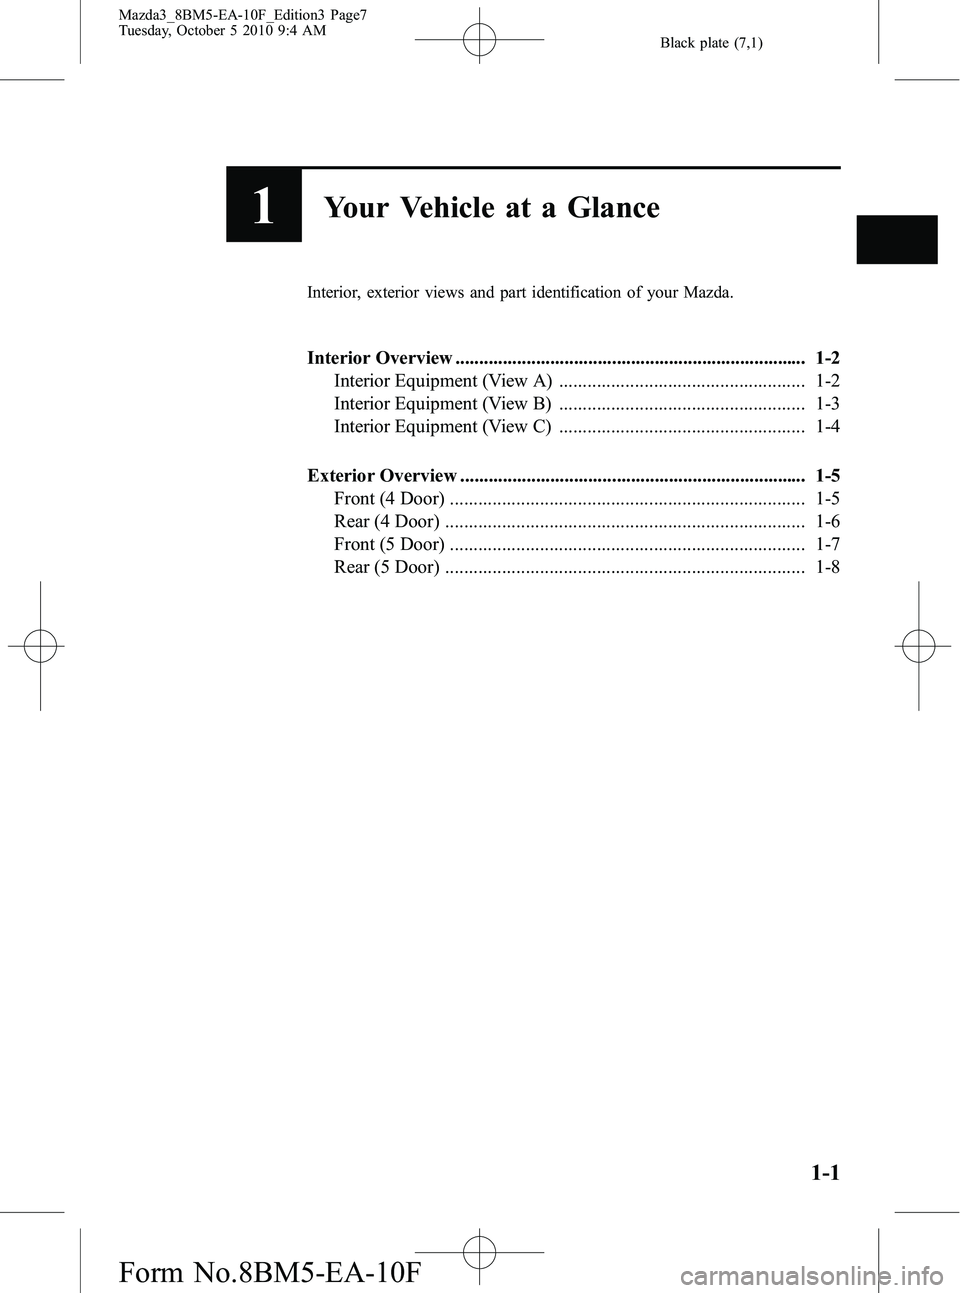 MAZDA MODEL 3 5-DOOR 2011  Owners Manual Black plate (7,1)
1Your Vehicle at a Glance
Interior, exterior views and part identification of your Mazda.
Interior Overview ..........................................................................